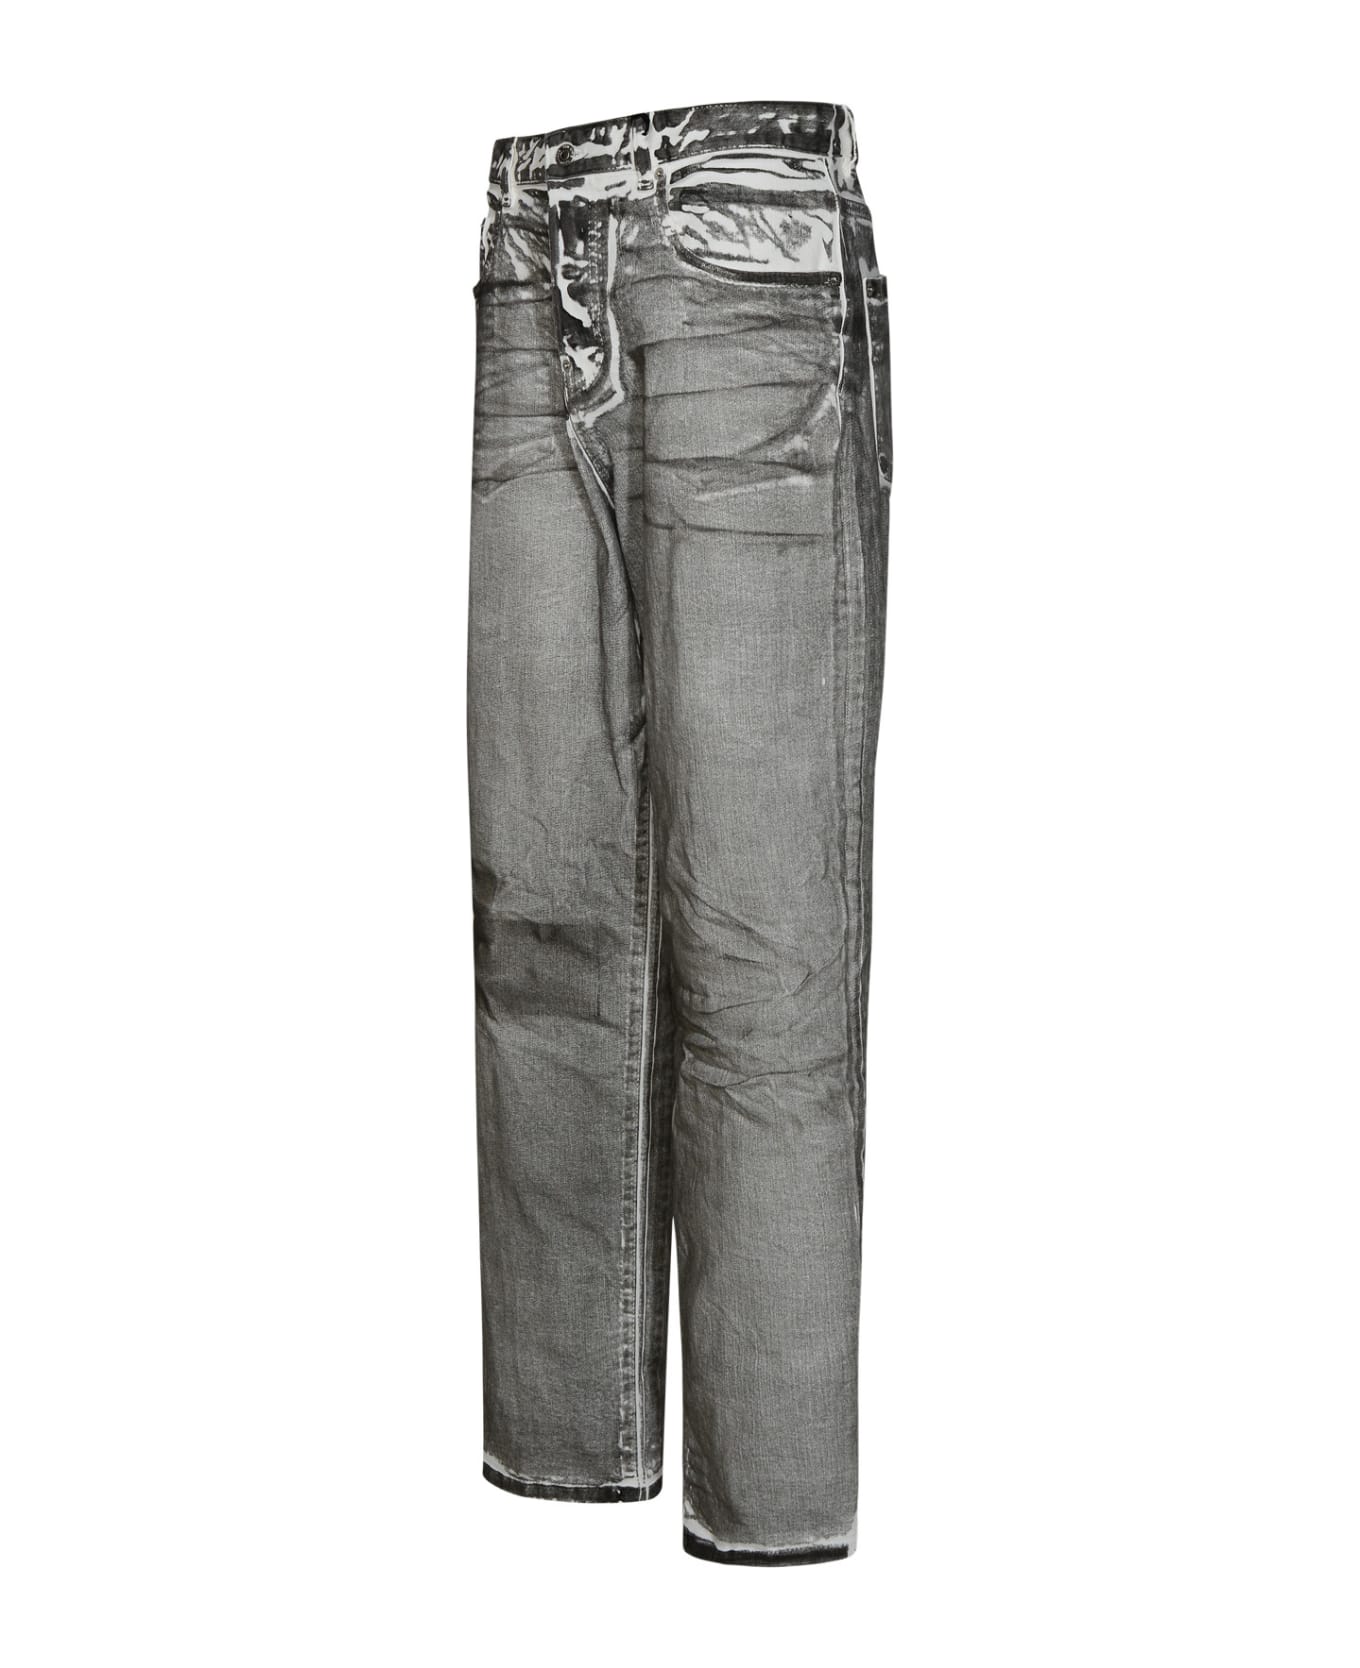 Dsquared2 Gray Tommy Jeans - GREY/WHITE